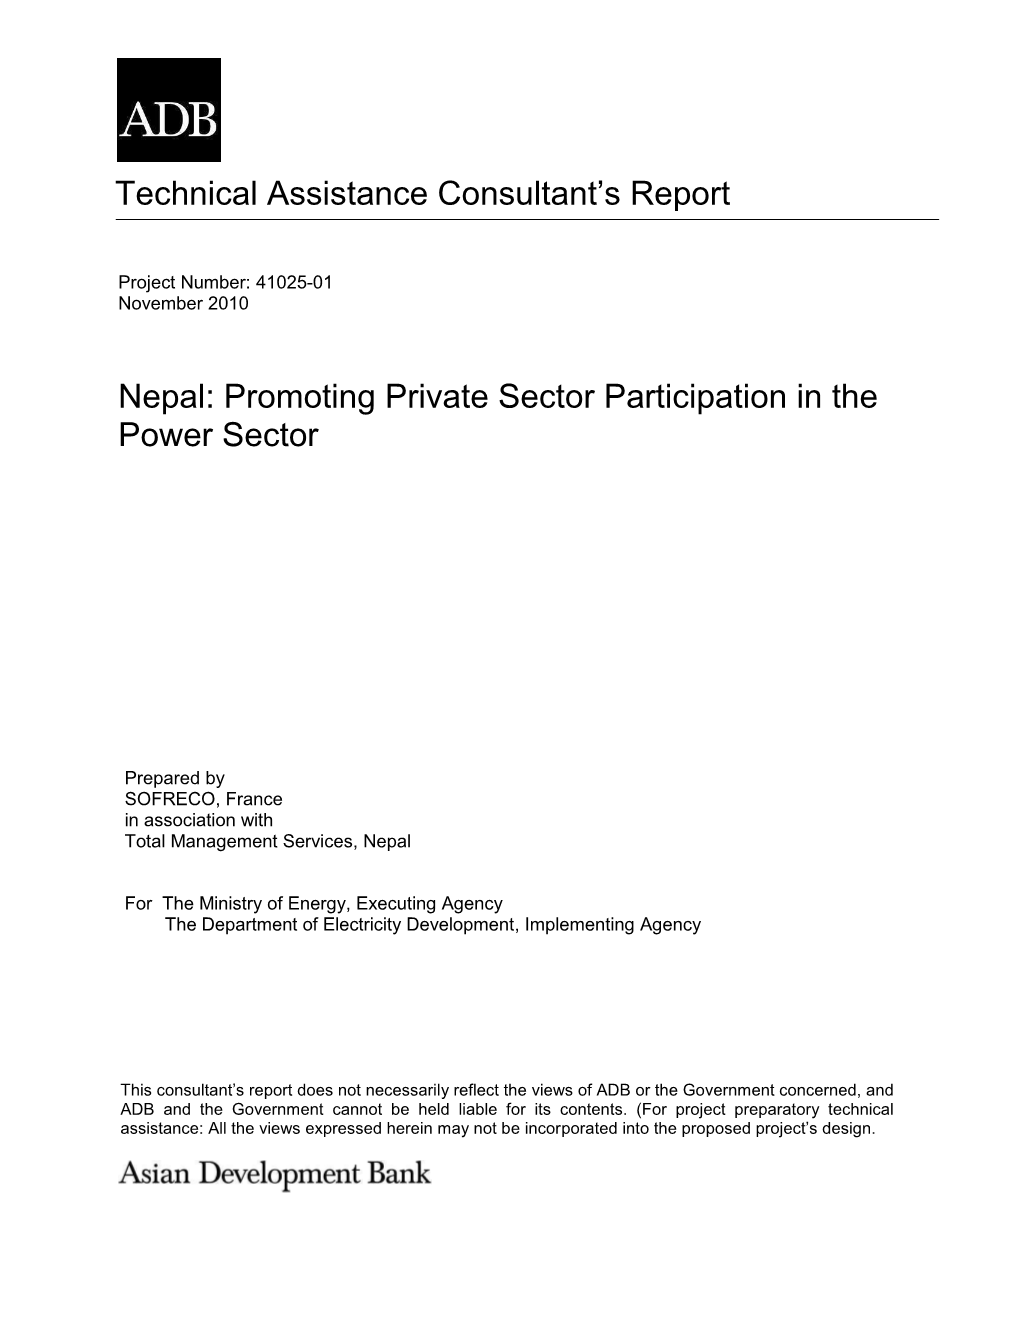 Technical Ssistance Consultant's Report Nepal: Promoting Private